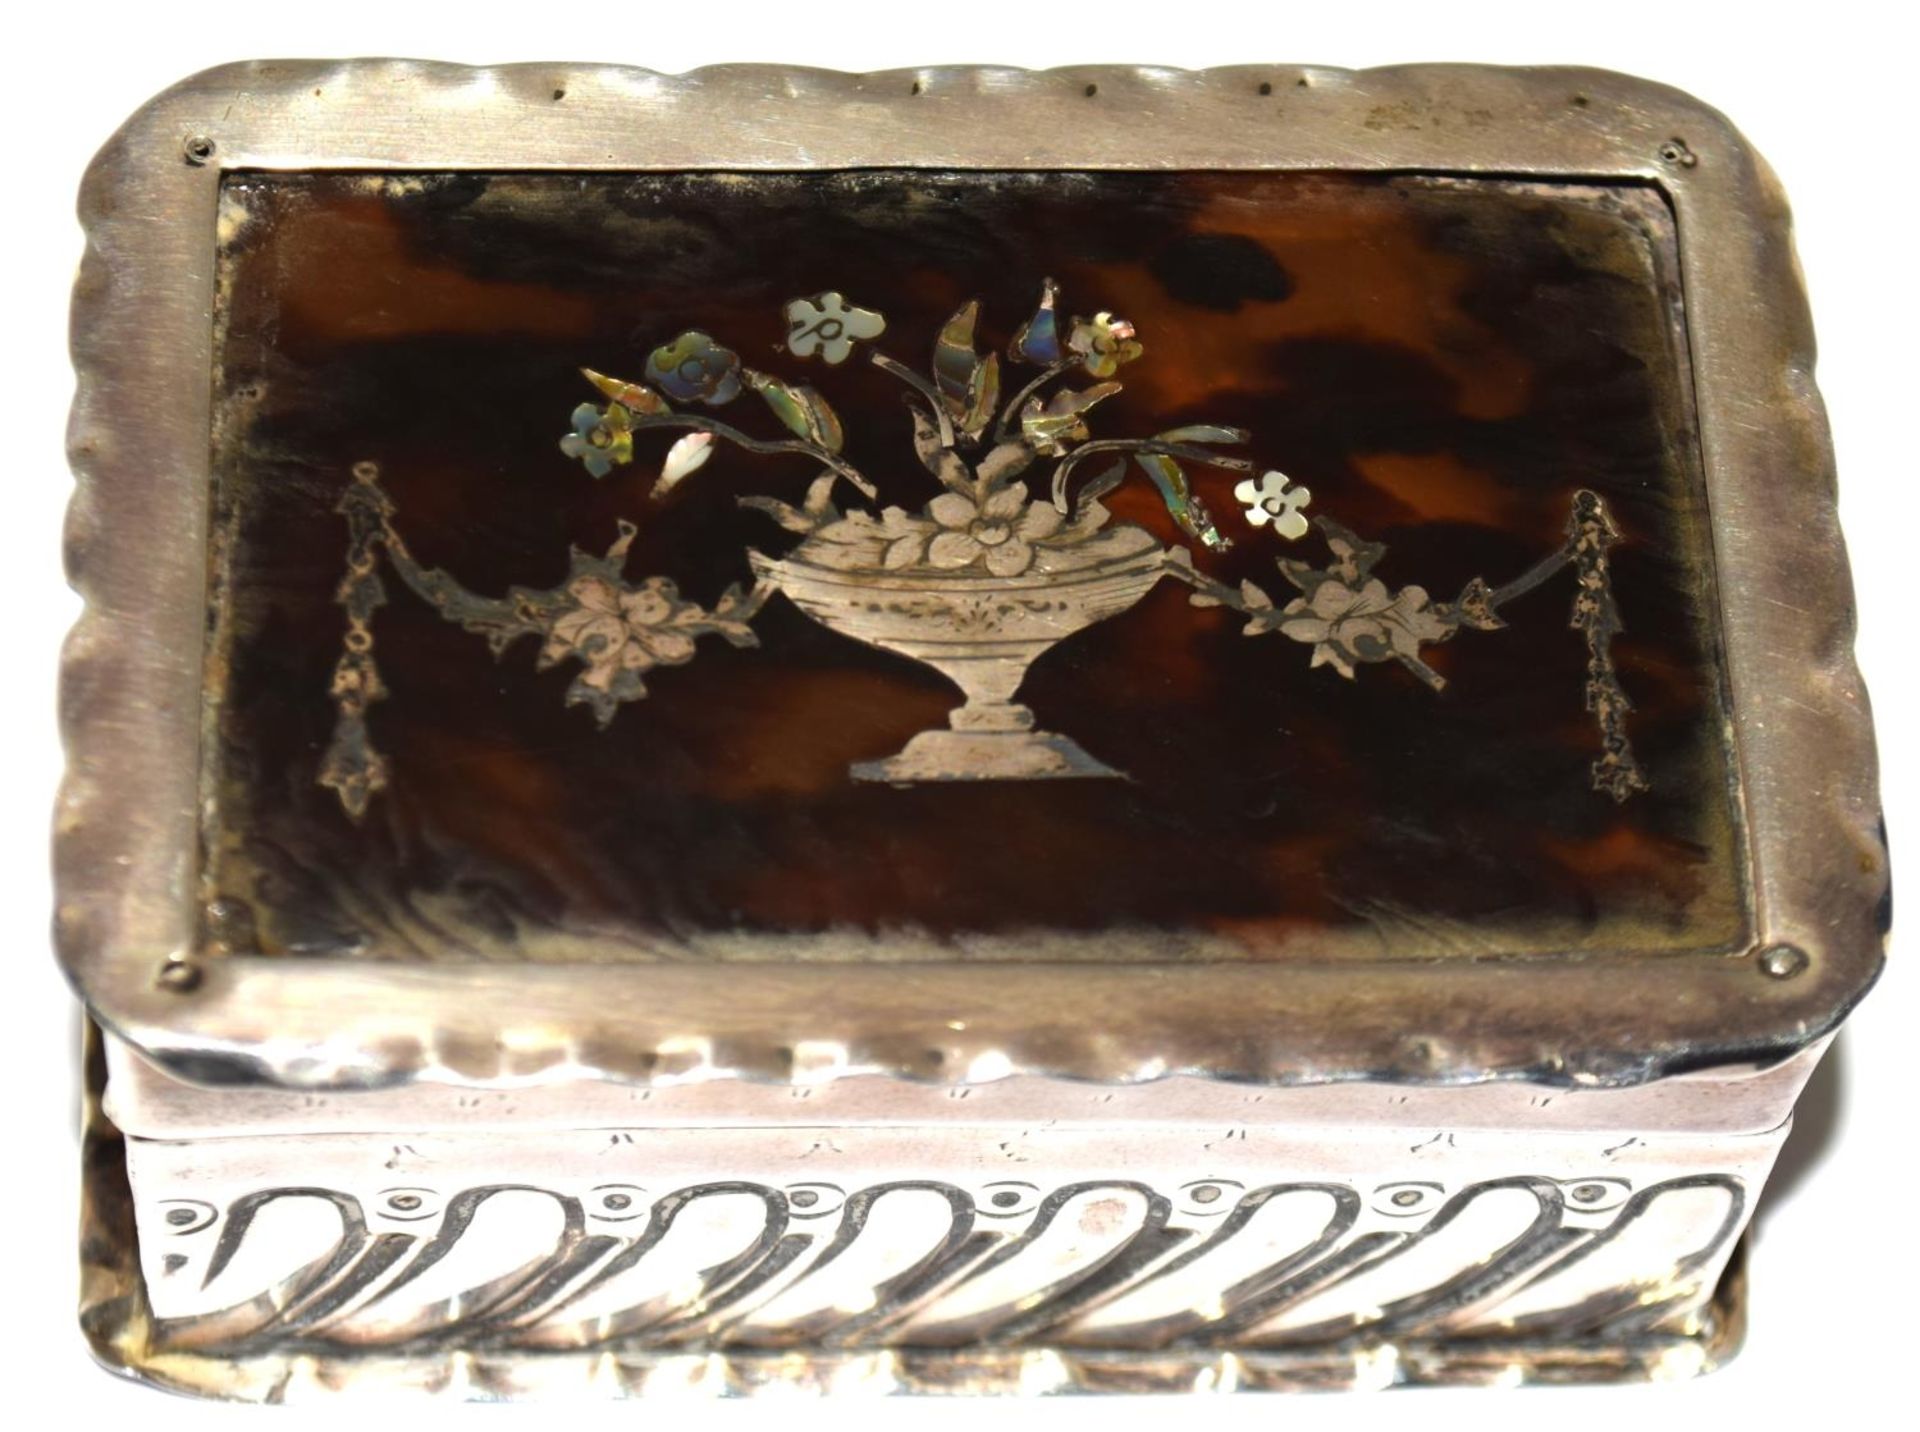 Silver small table top pill box set with Tortoise shell and MOP decorative lid 4x7x5cm - Image 5 of 6